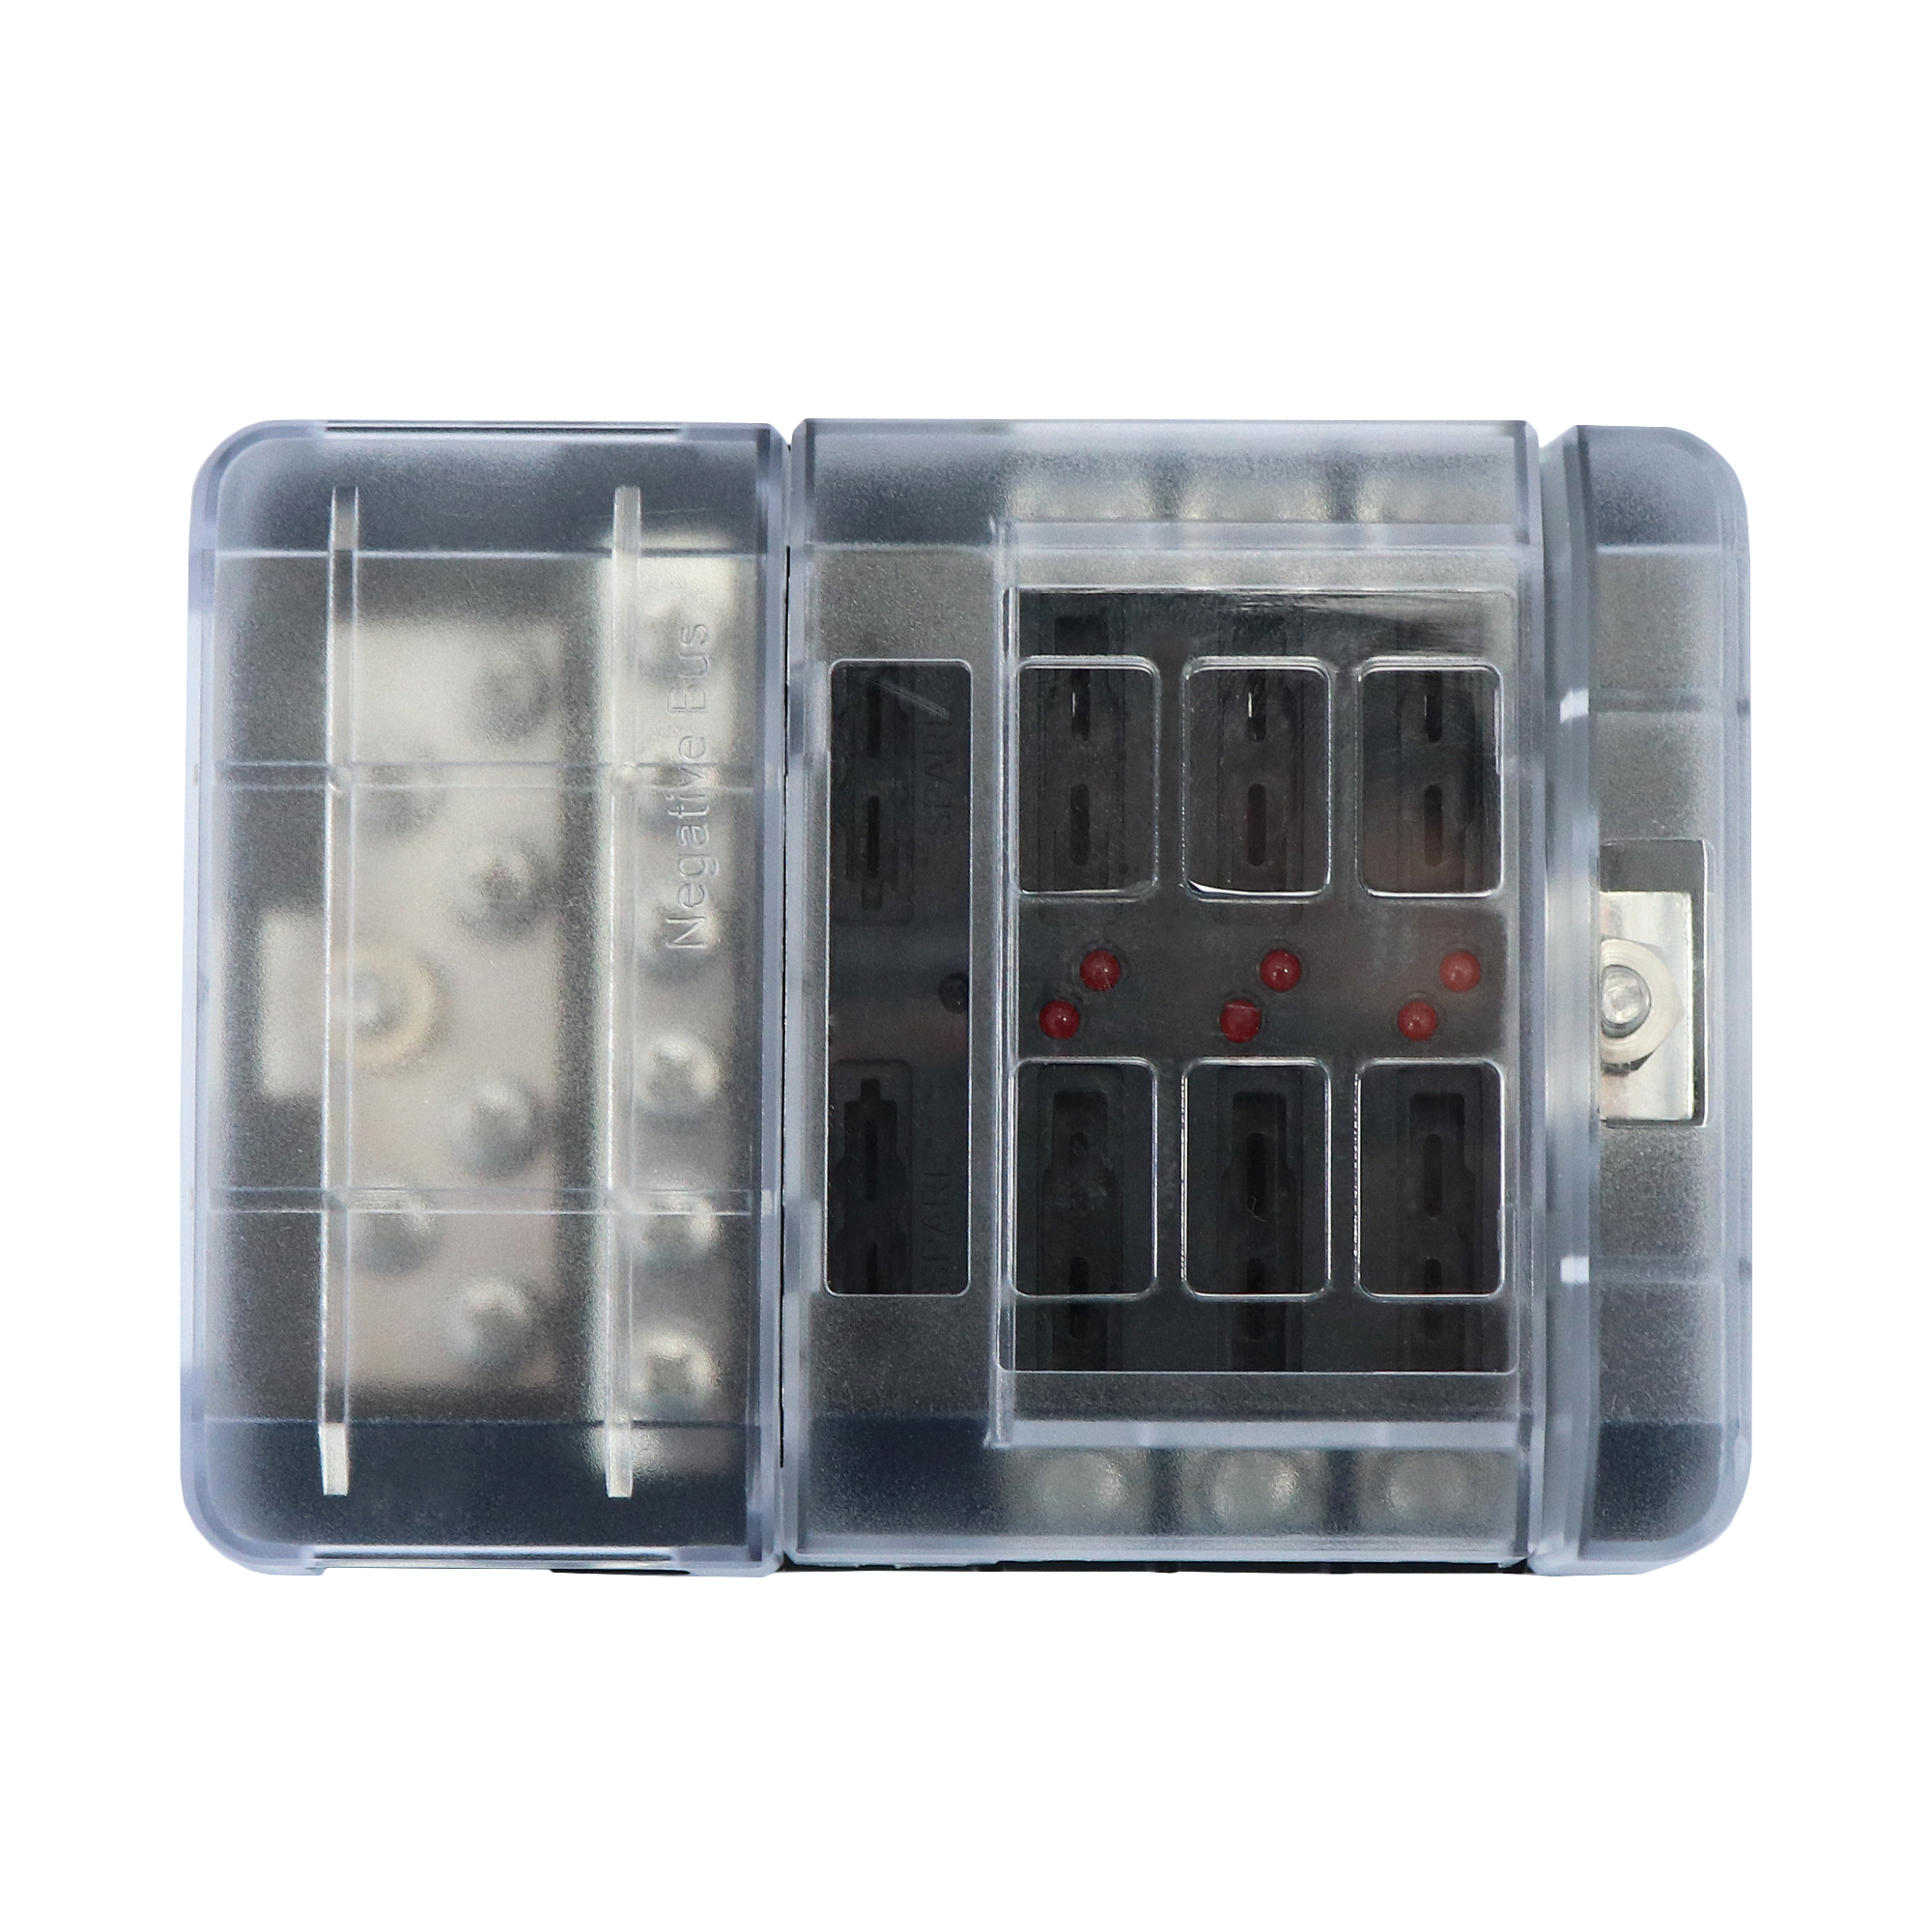 6 Way Fuse Box with Thumbscrew and LED Indicator 6 Circuit Blade Fuse Block Holder W/Negative Bus Waterproof Cover Label Sticker for 12V/24V Auto Car RV Marine Boat and Yacht